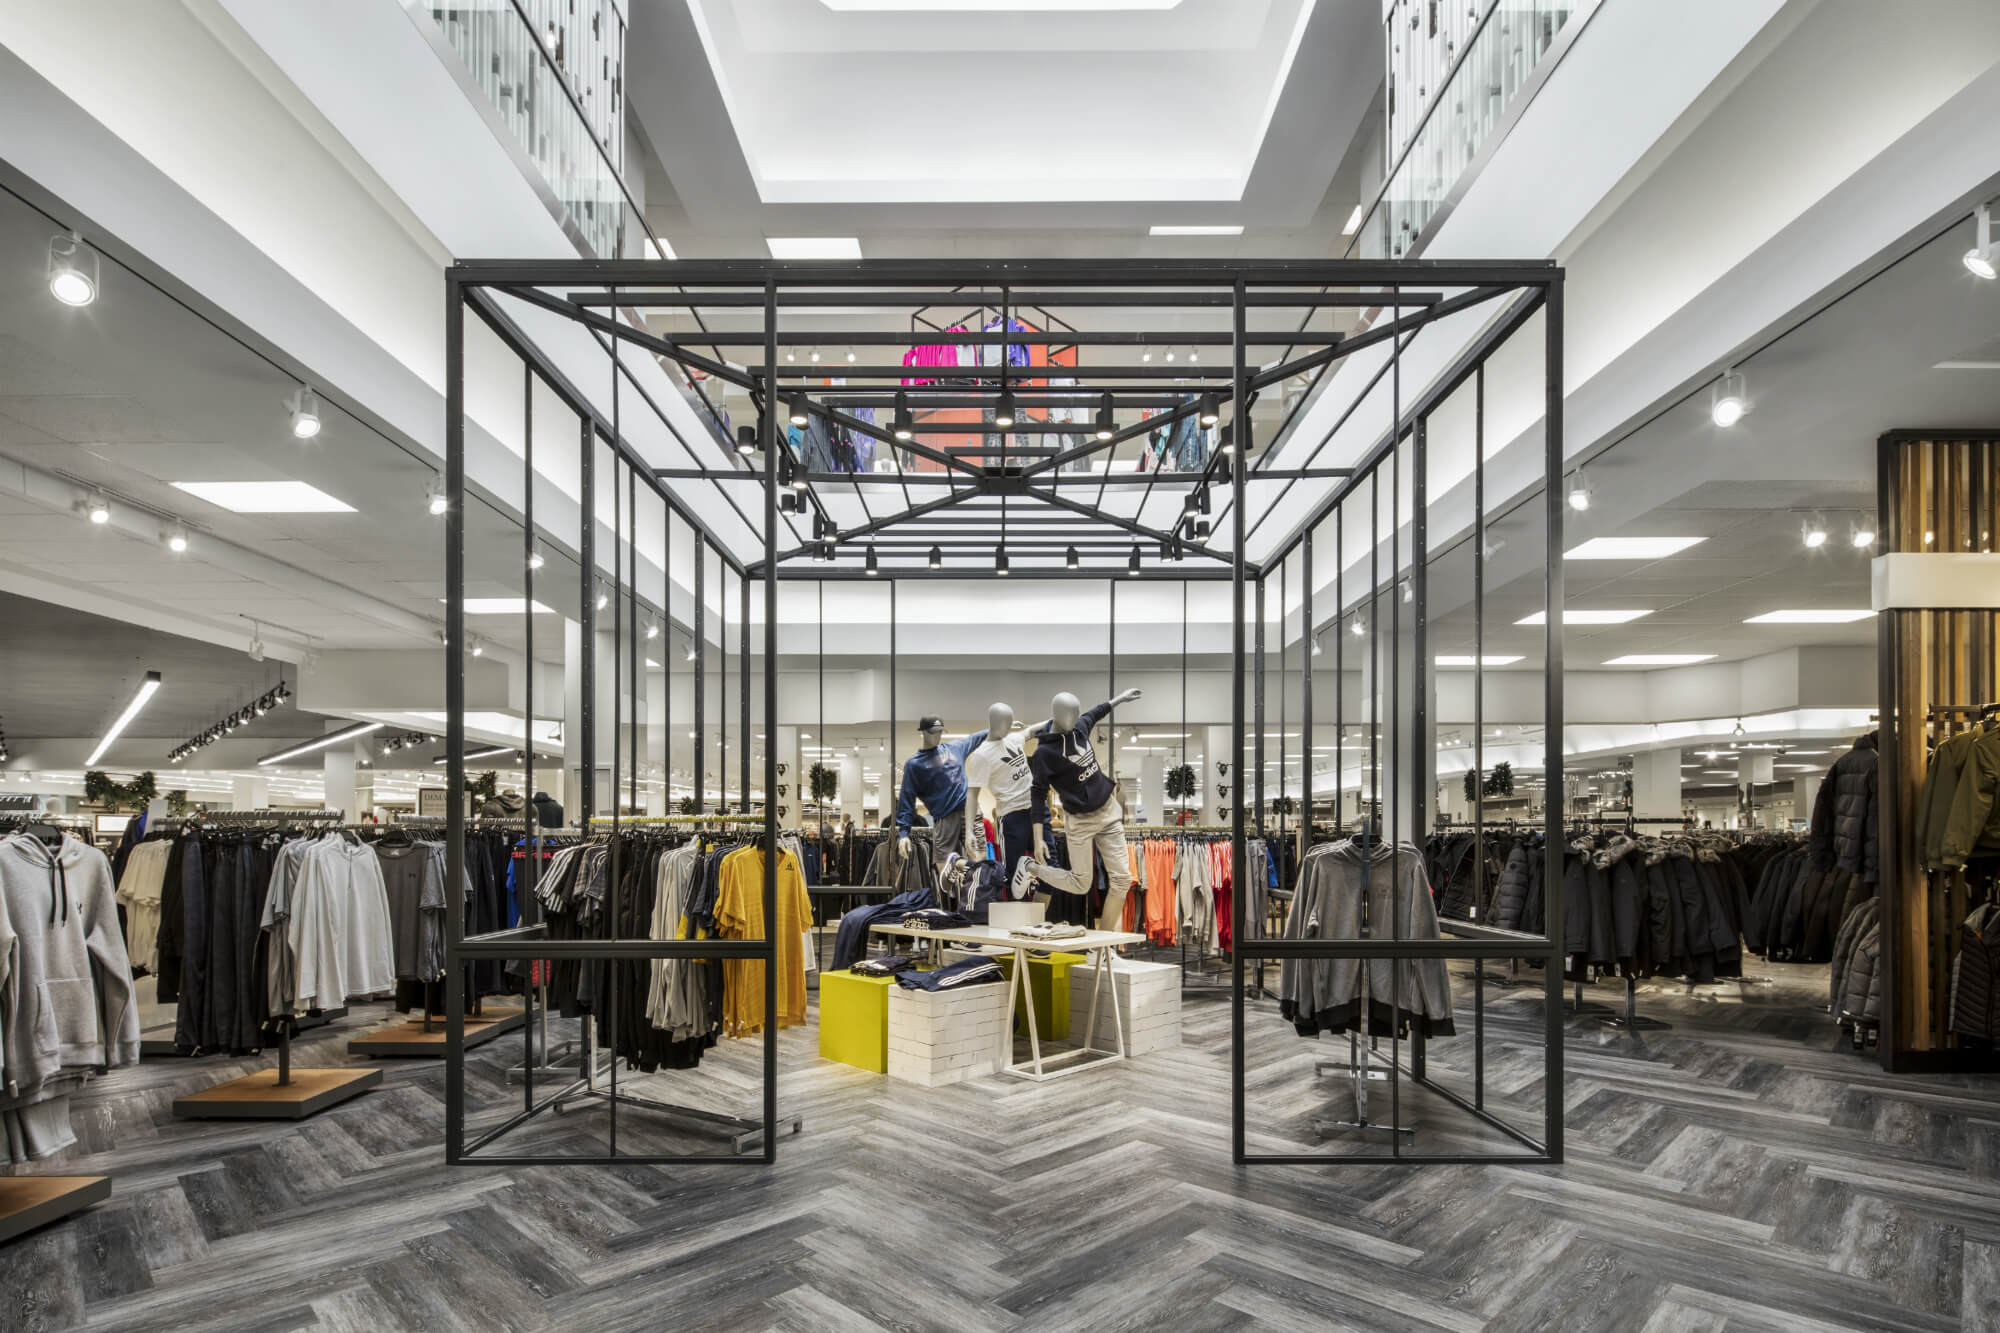 Watch These Top Retail Design Trends in 2022